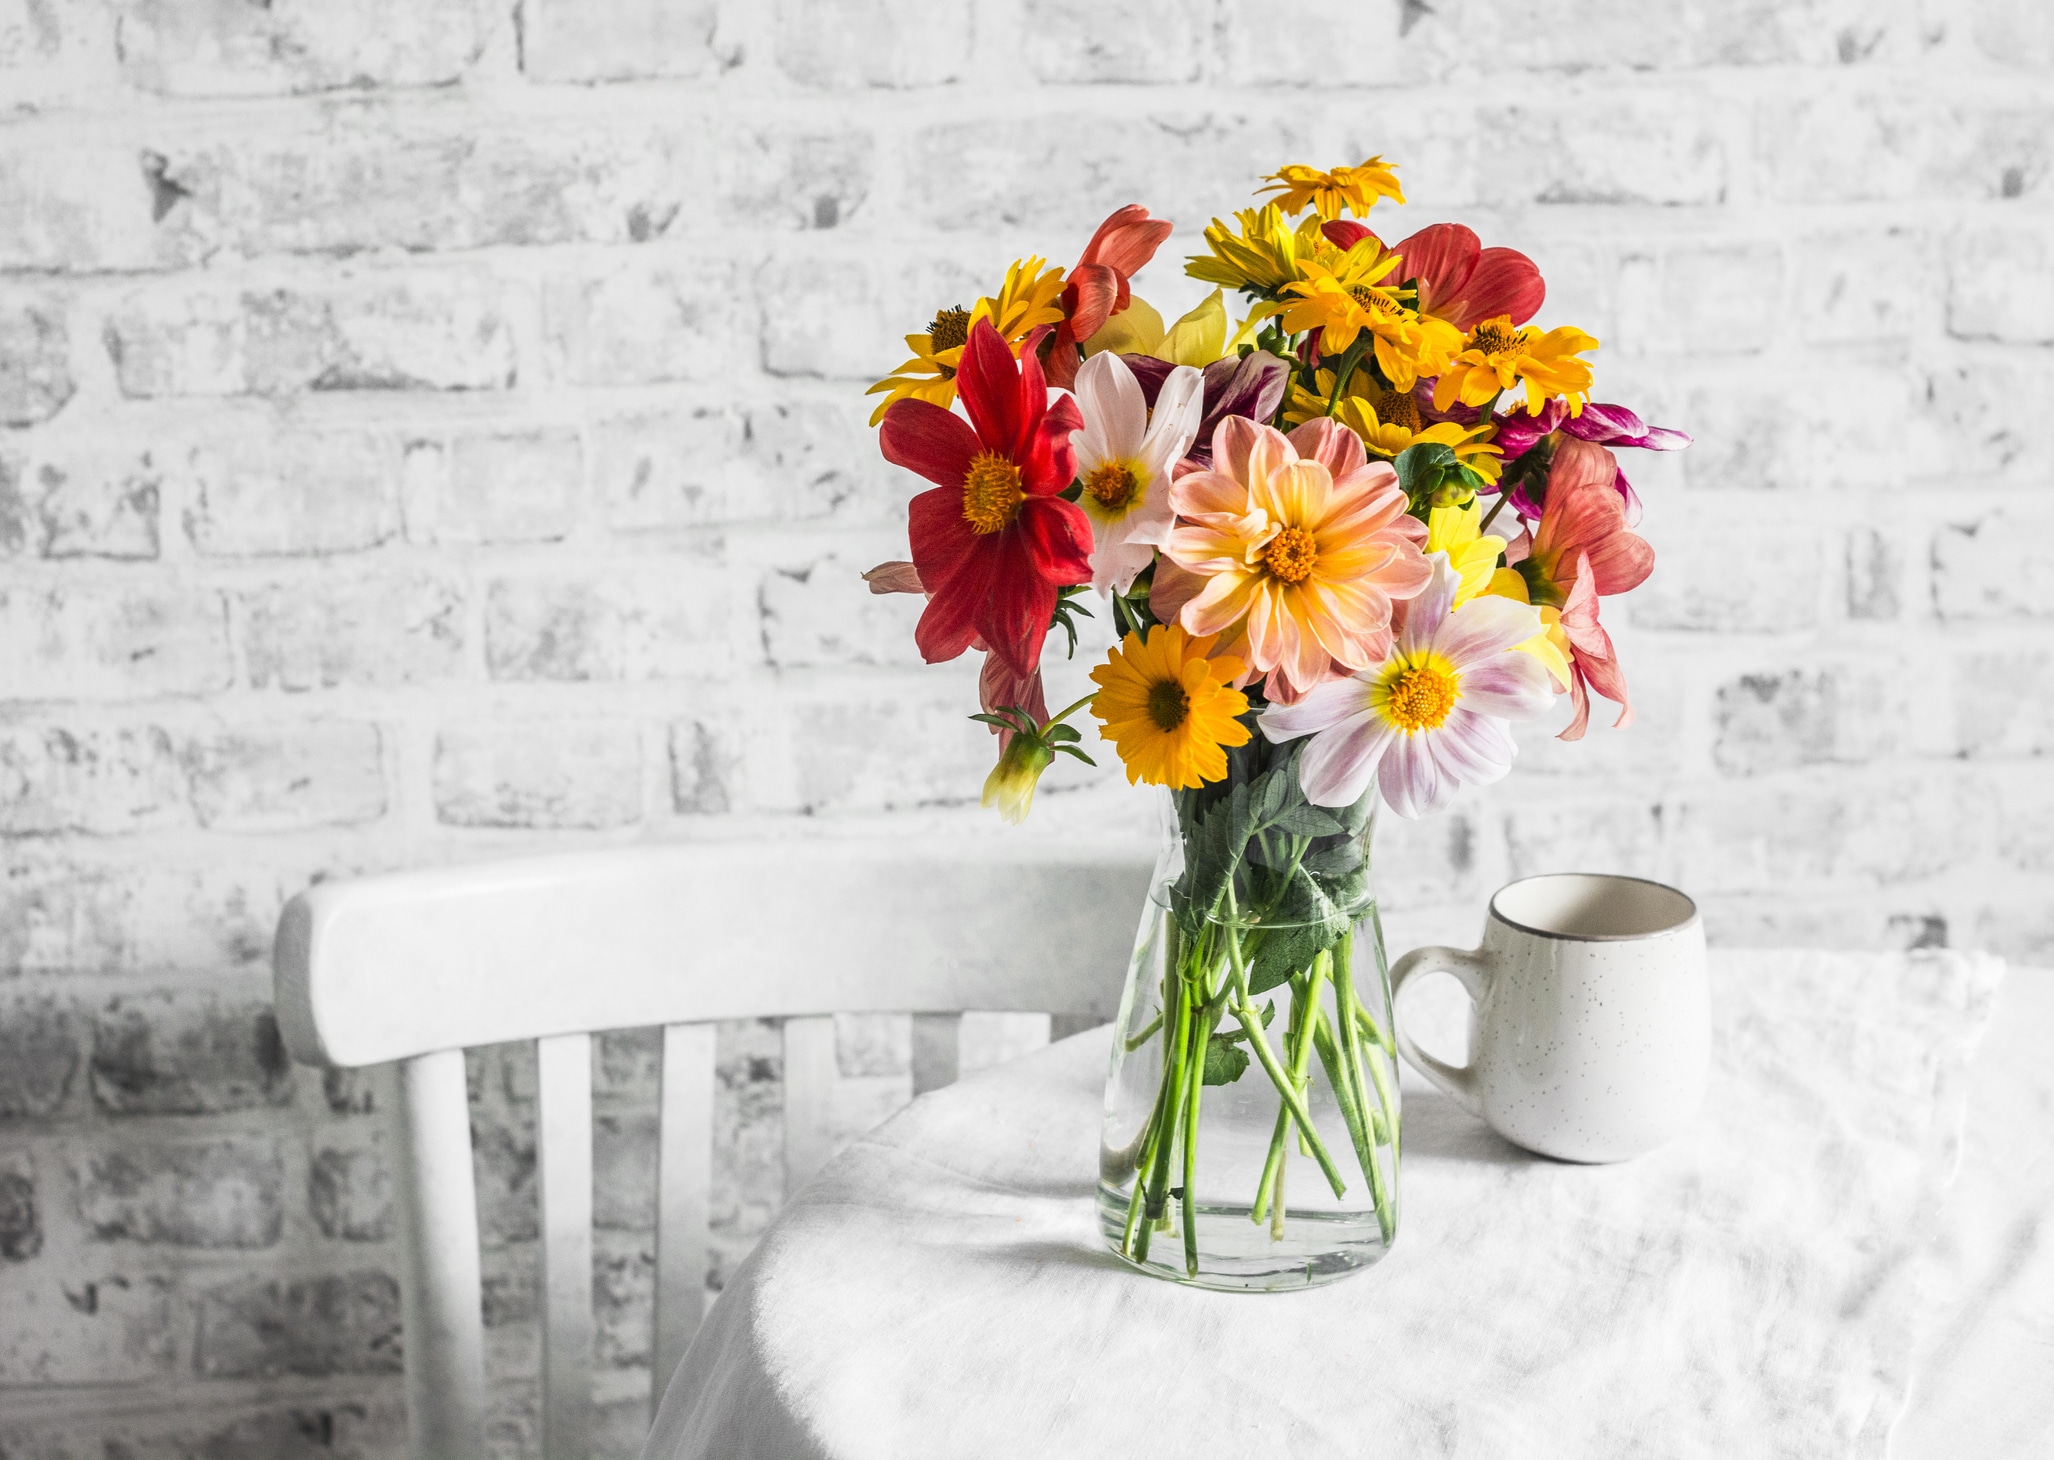 Mixed Flowers with Cup On a Table Indoor